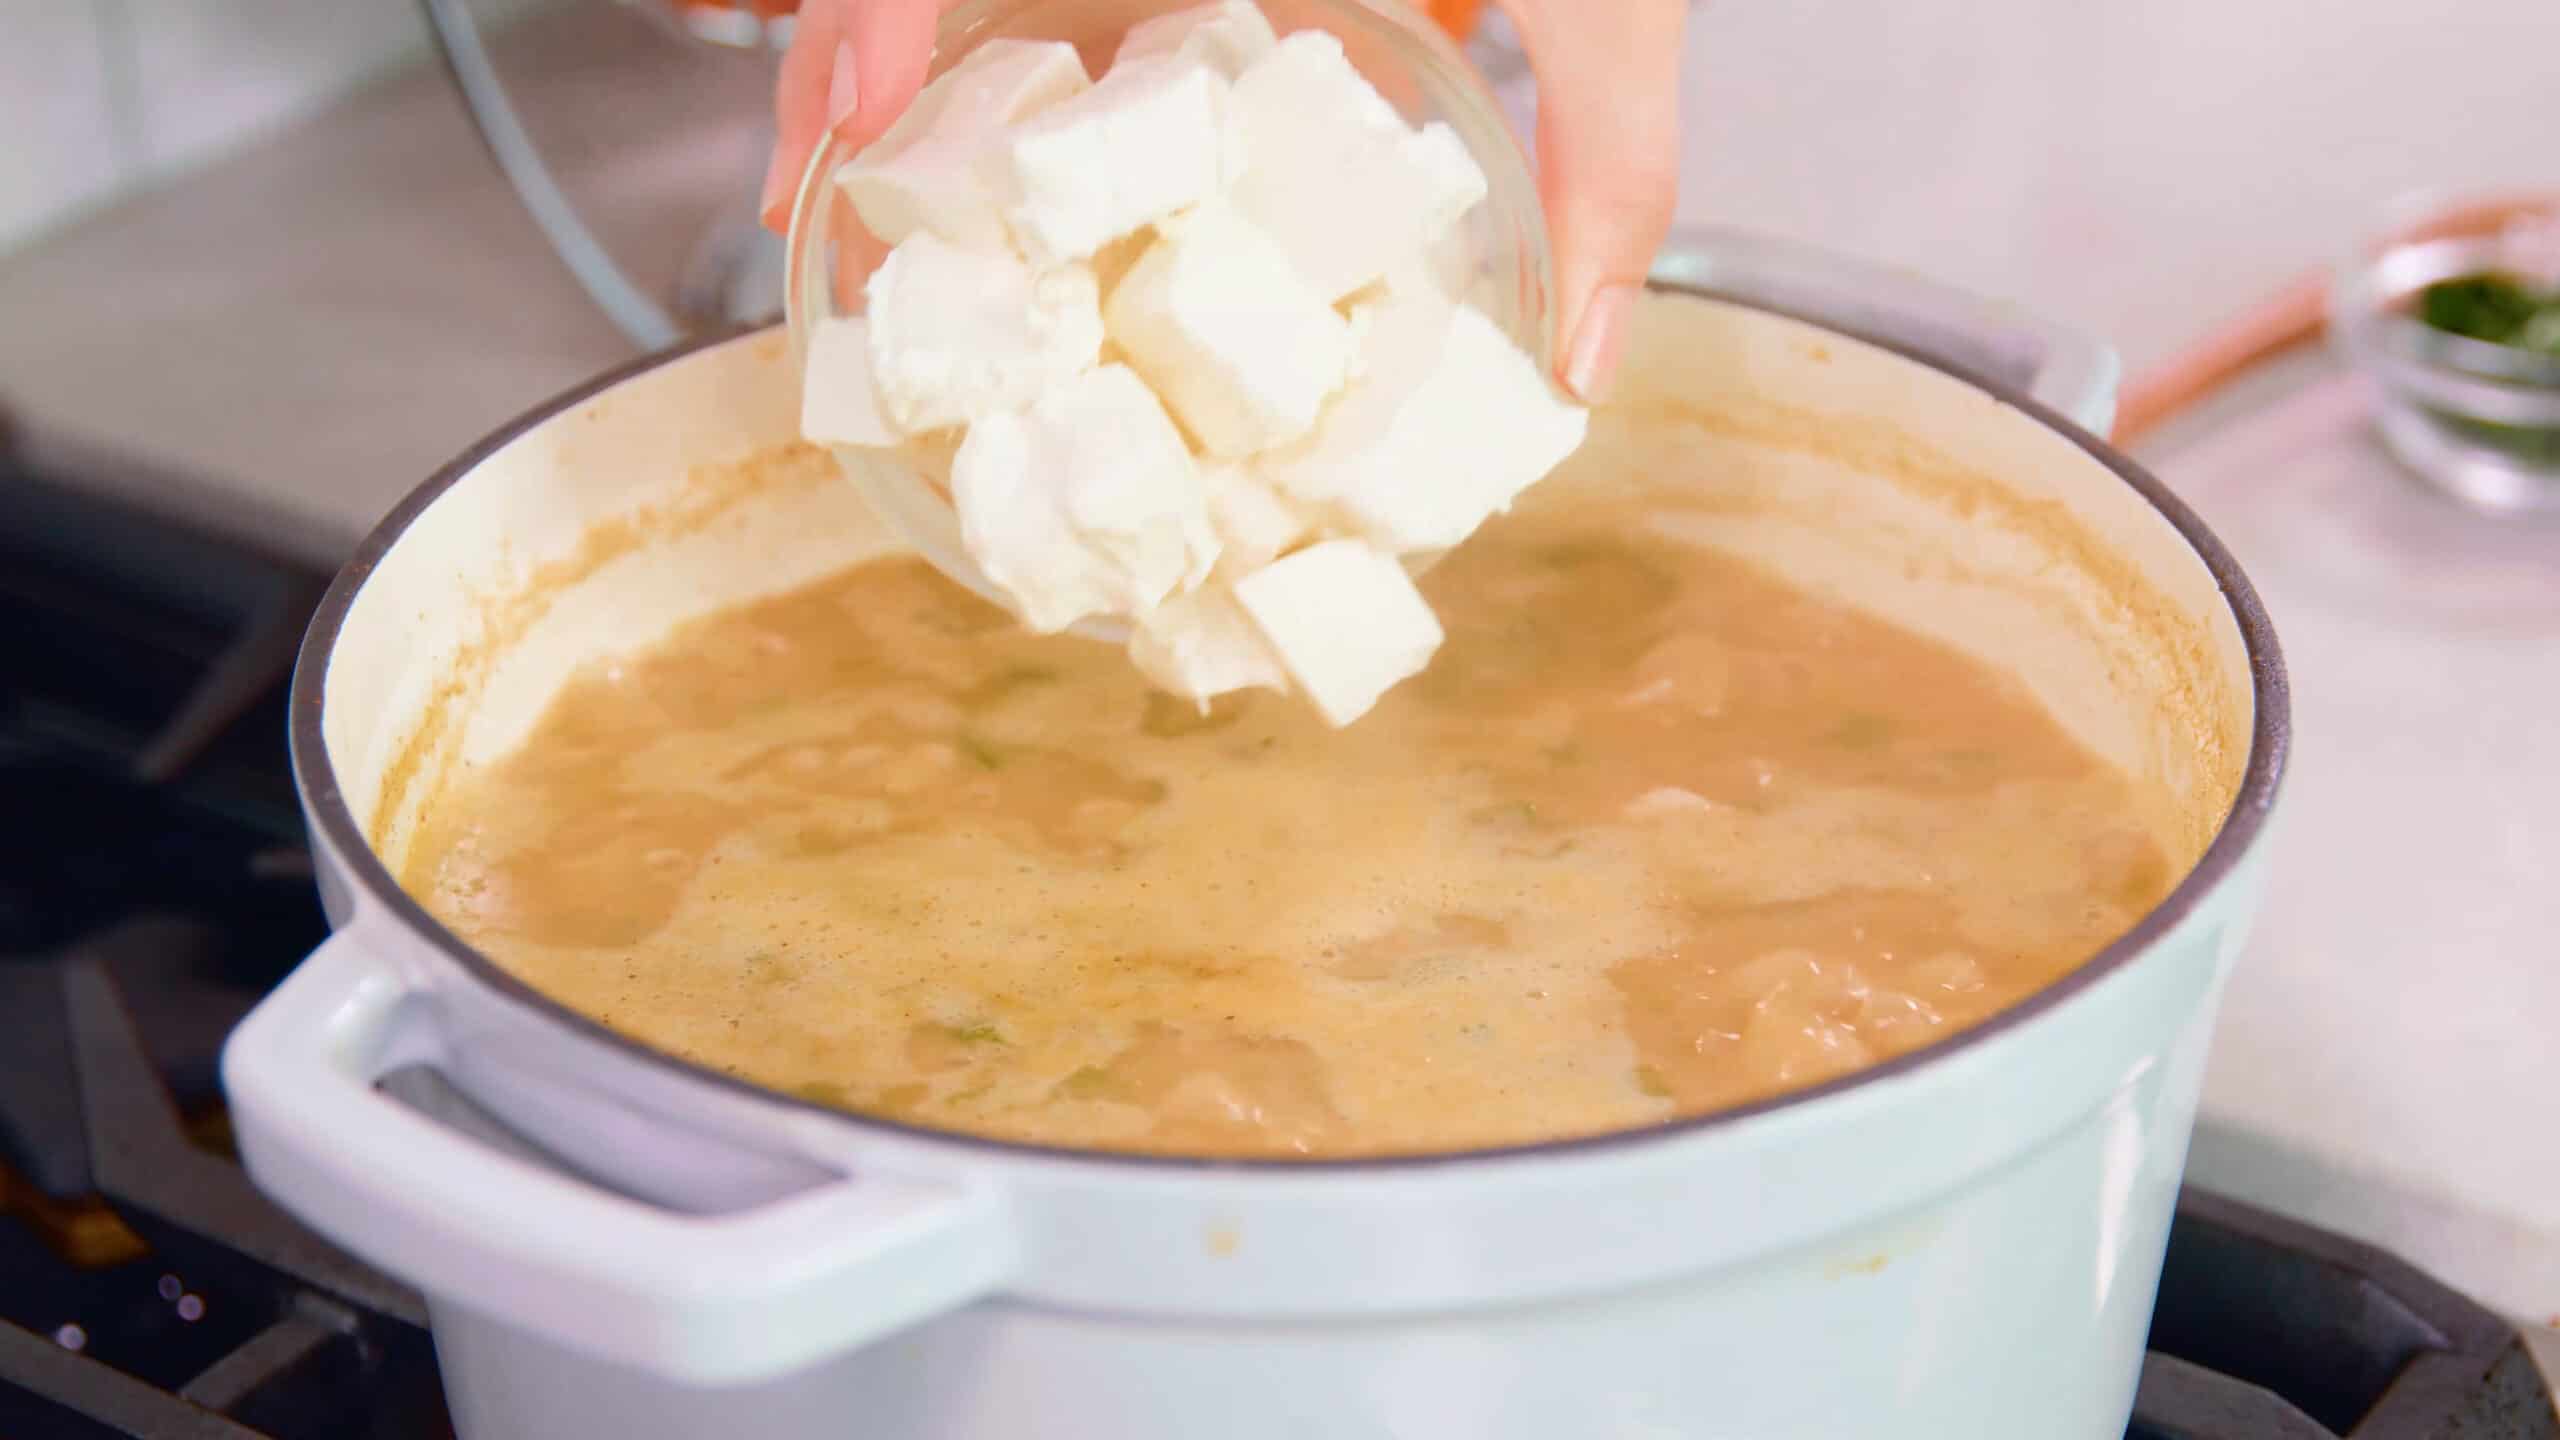 Angled view of white enamel cast iron pot on the stovetop with cubes of cream cheese being added from a clear glass bowl